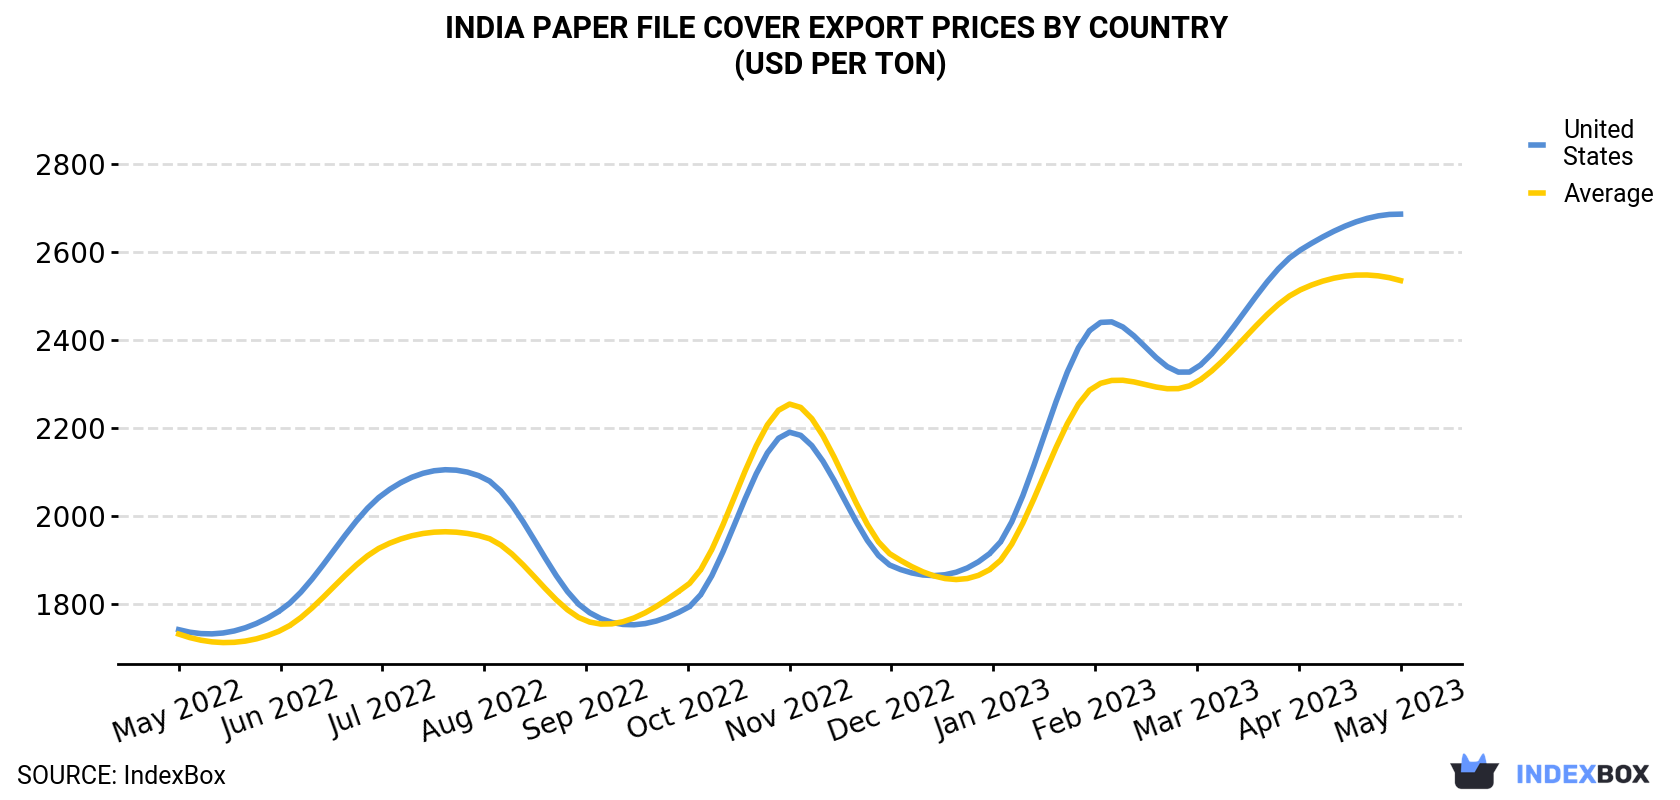 India Paper File Cover Export Prices By Country (USD Per Ton)